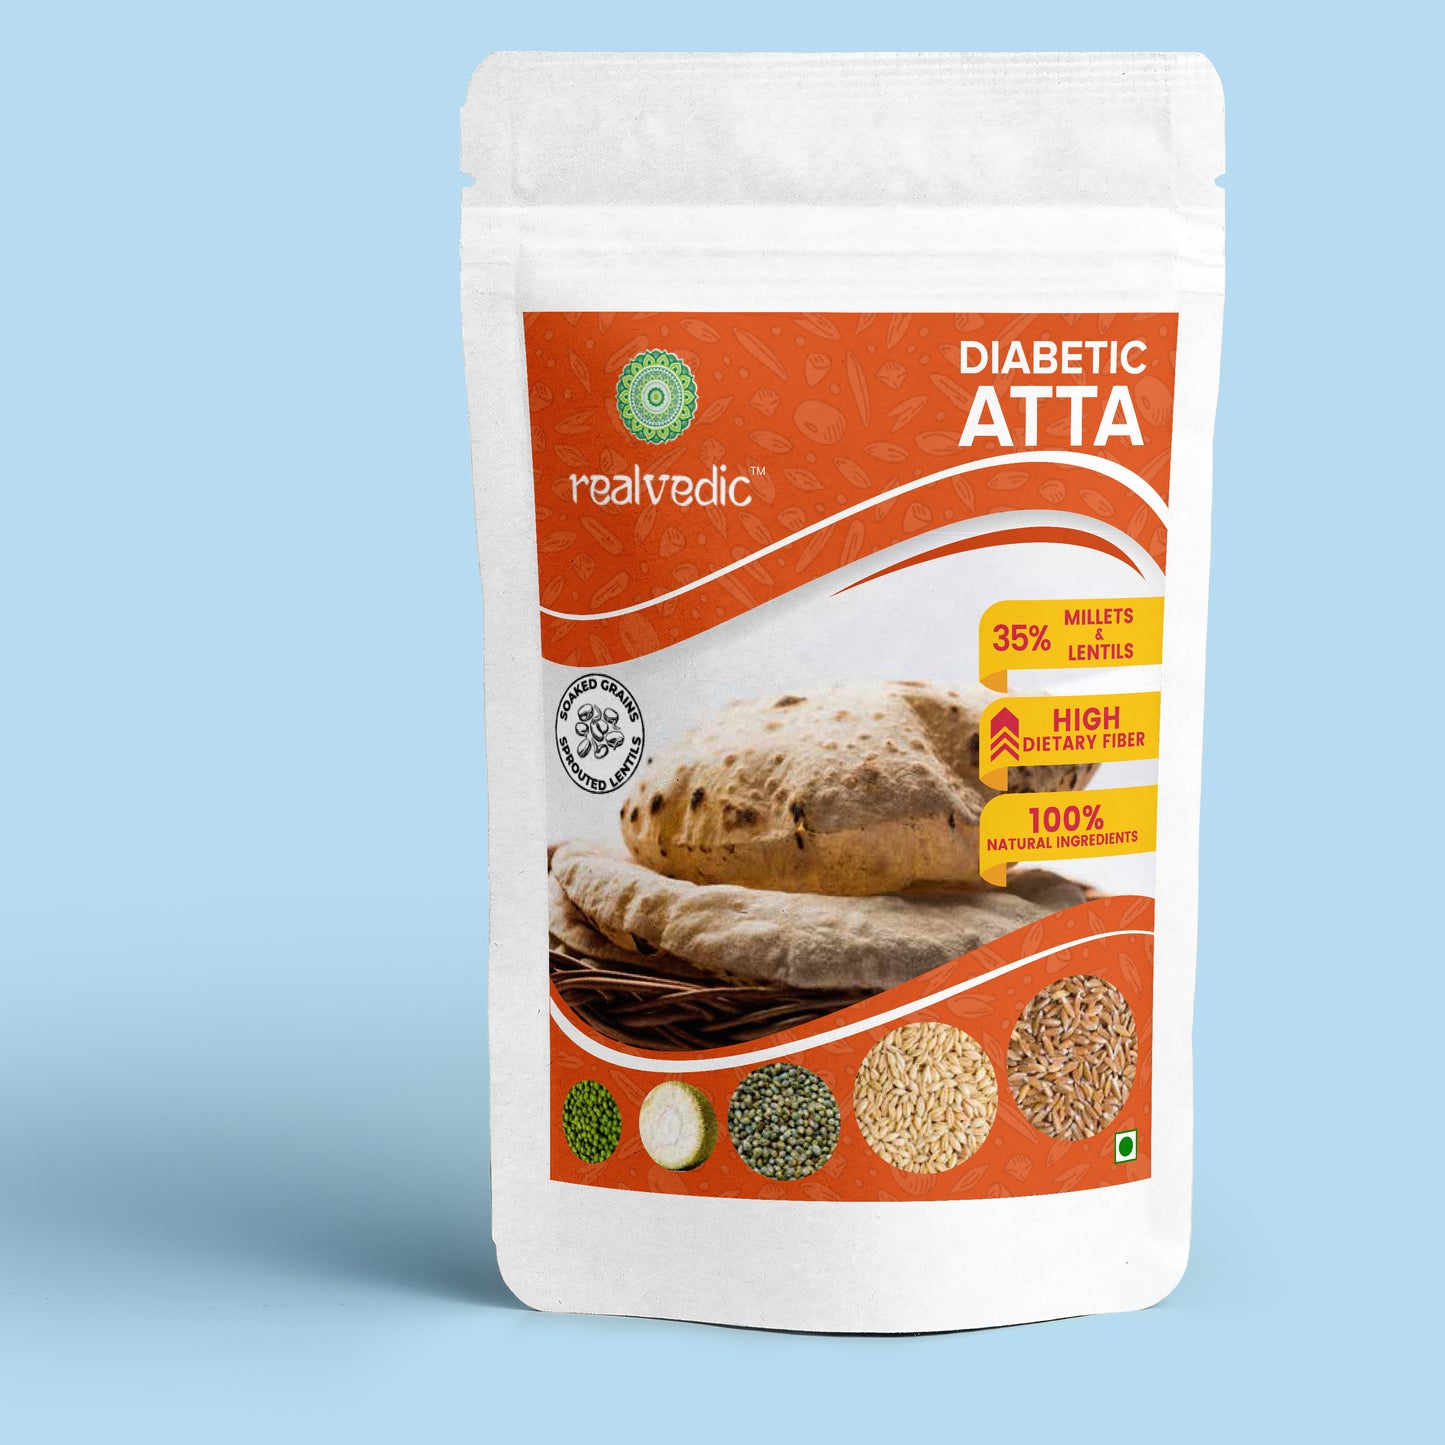 Diabetic Atta | Gluten Free Millets and Emmer Wheat & Grains | Low GI